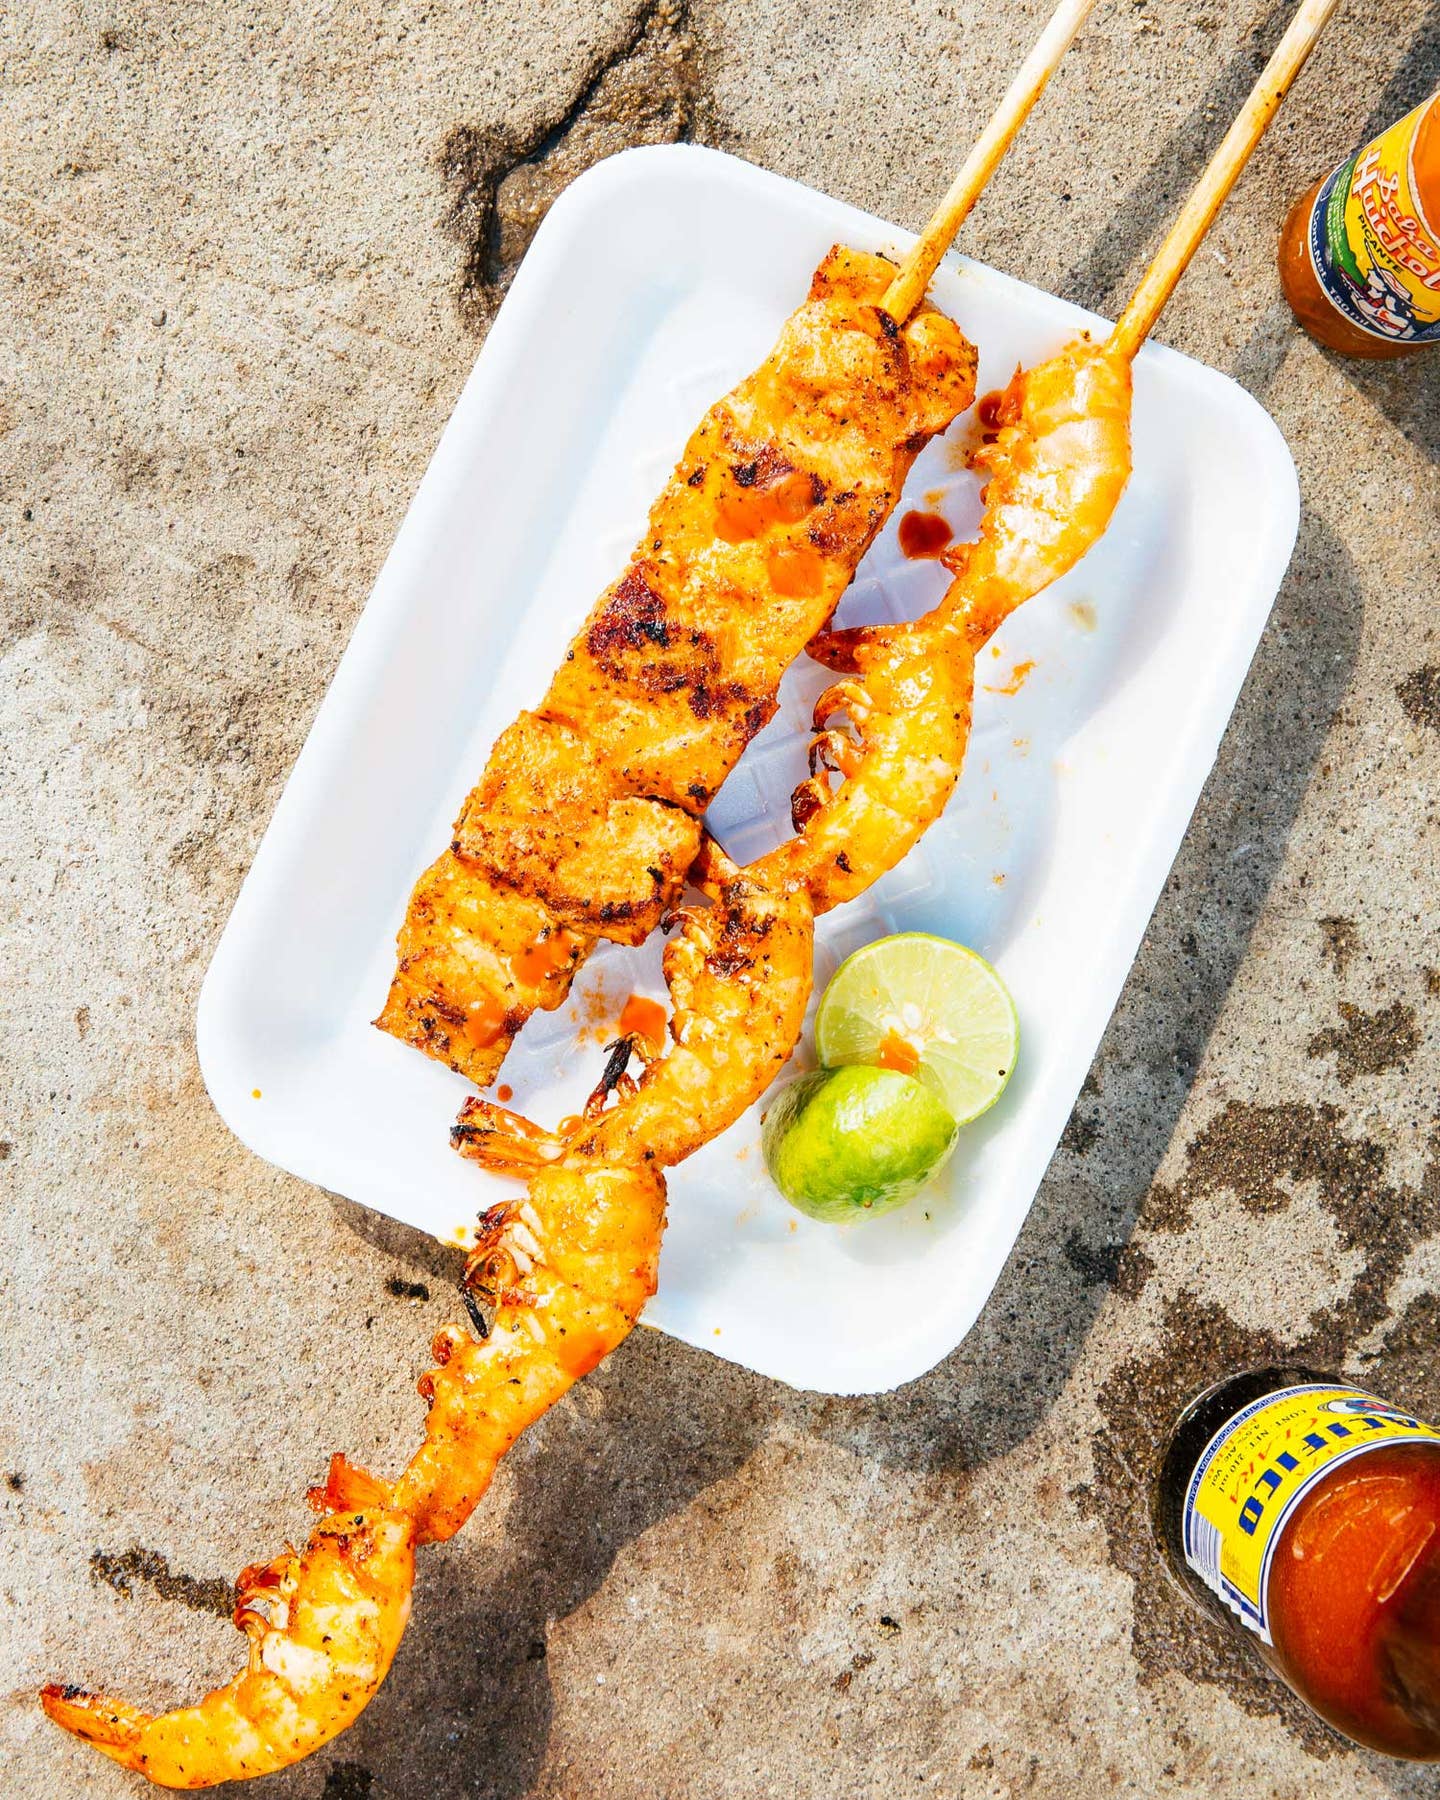 This Fish on a Stick Might Be the Best Beach Snack in Mexico